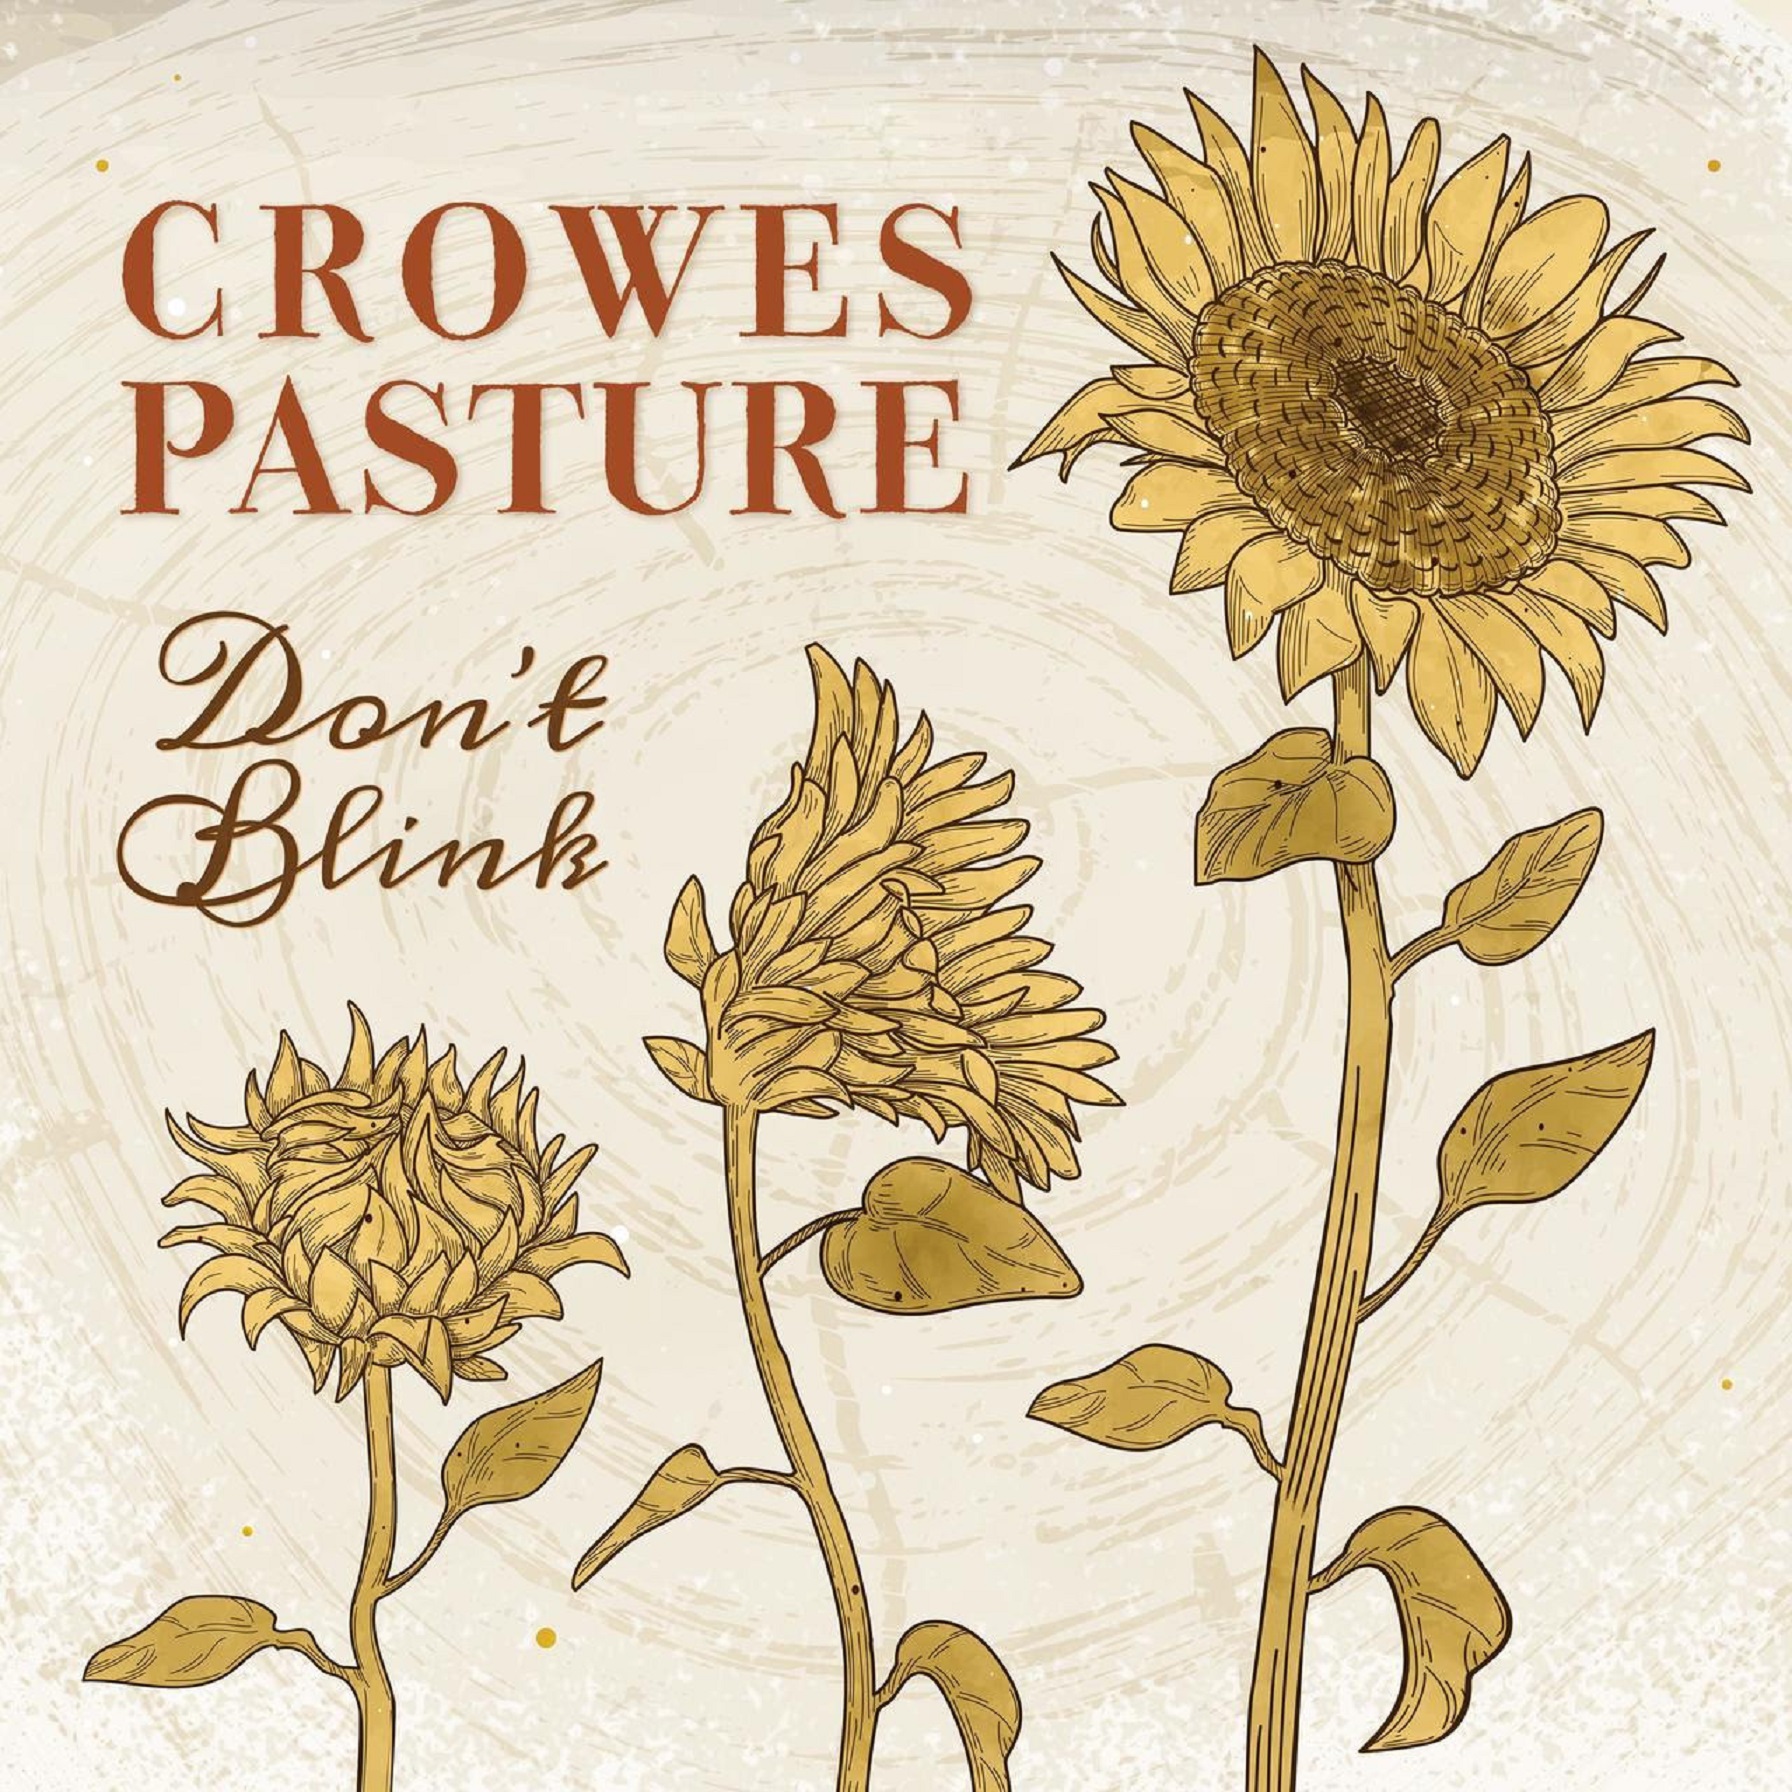 Folk/Americana Duo Crowes Pasture To Release 'Don't Blink' Sept. 1